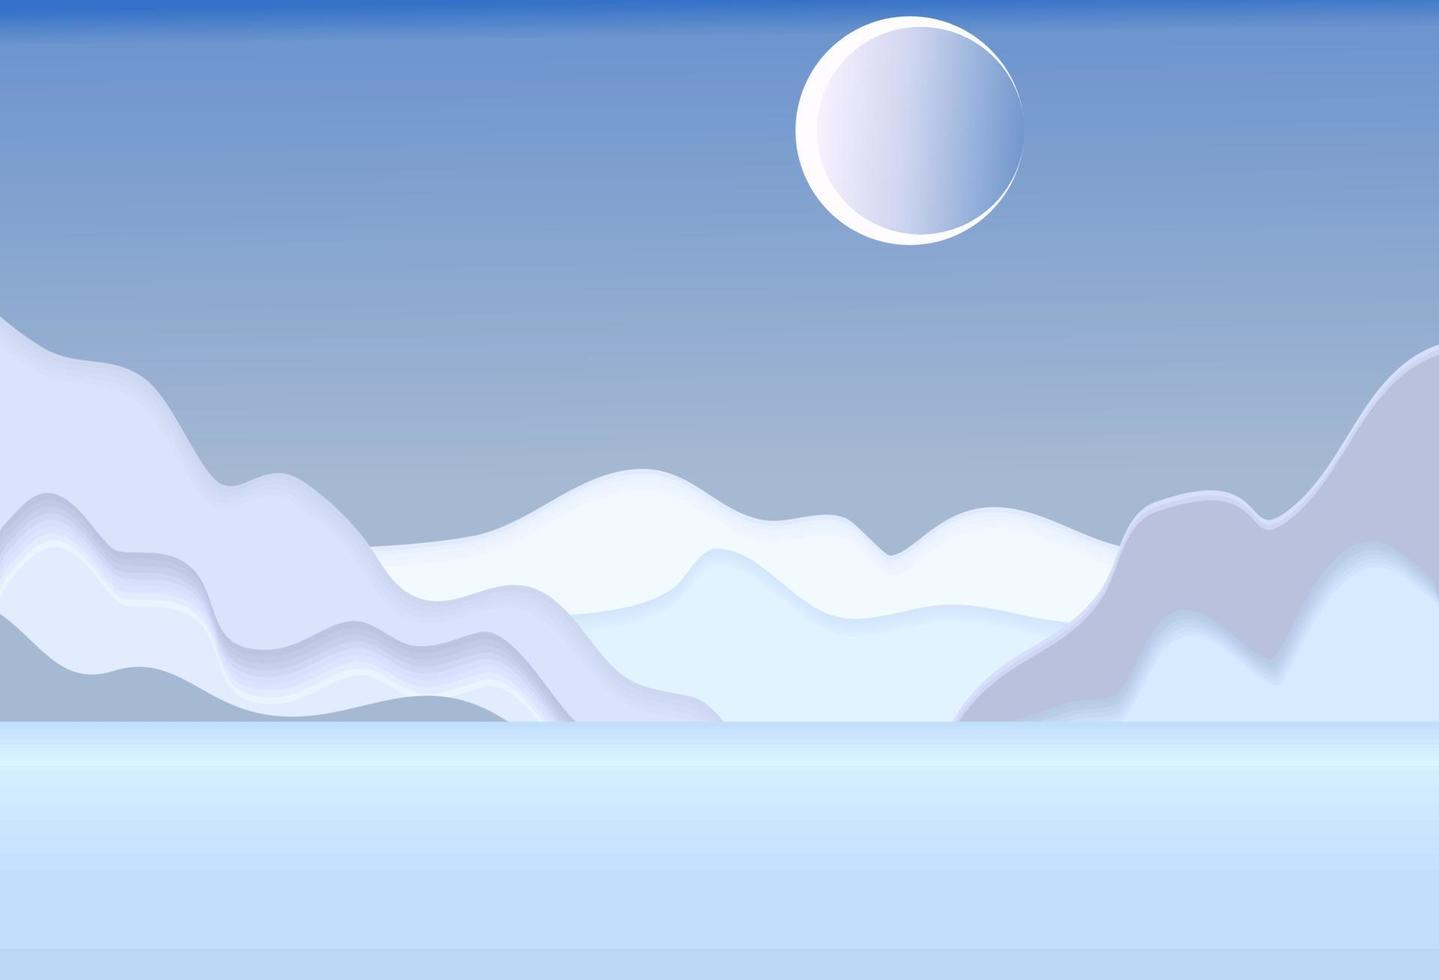 paper field landscape summer landscape with green hills and blue sky white clouds layers paper cut vector creative 3d nature ecology graphic world image, blue sea and blue moon on sky.